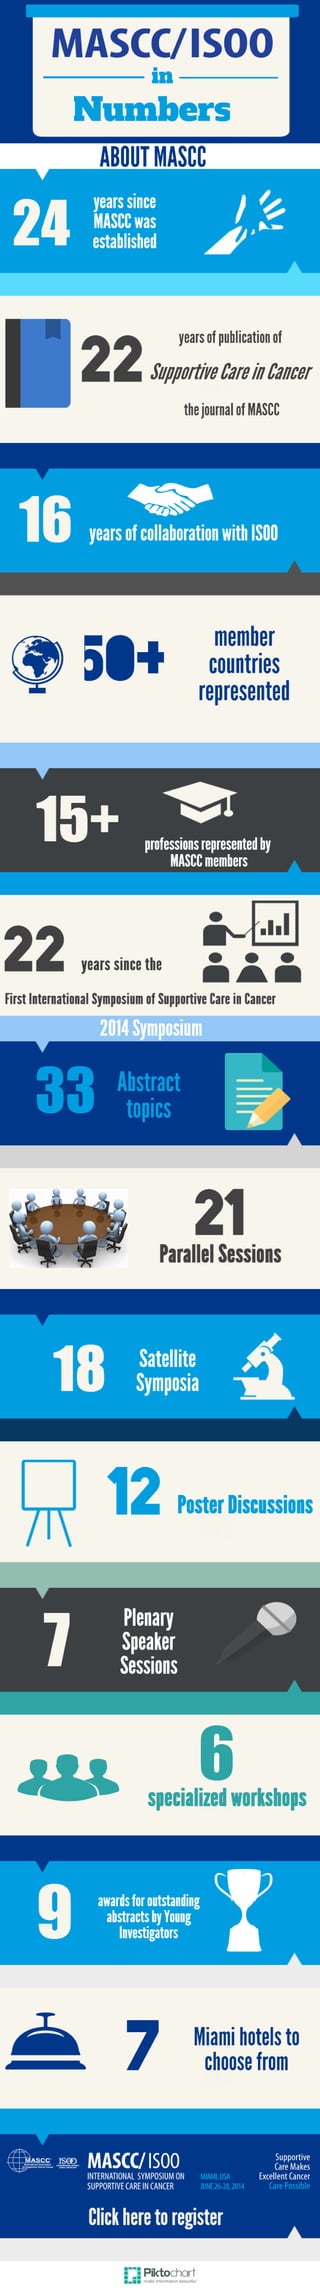 MASCC-ISOO in Numbers